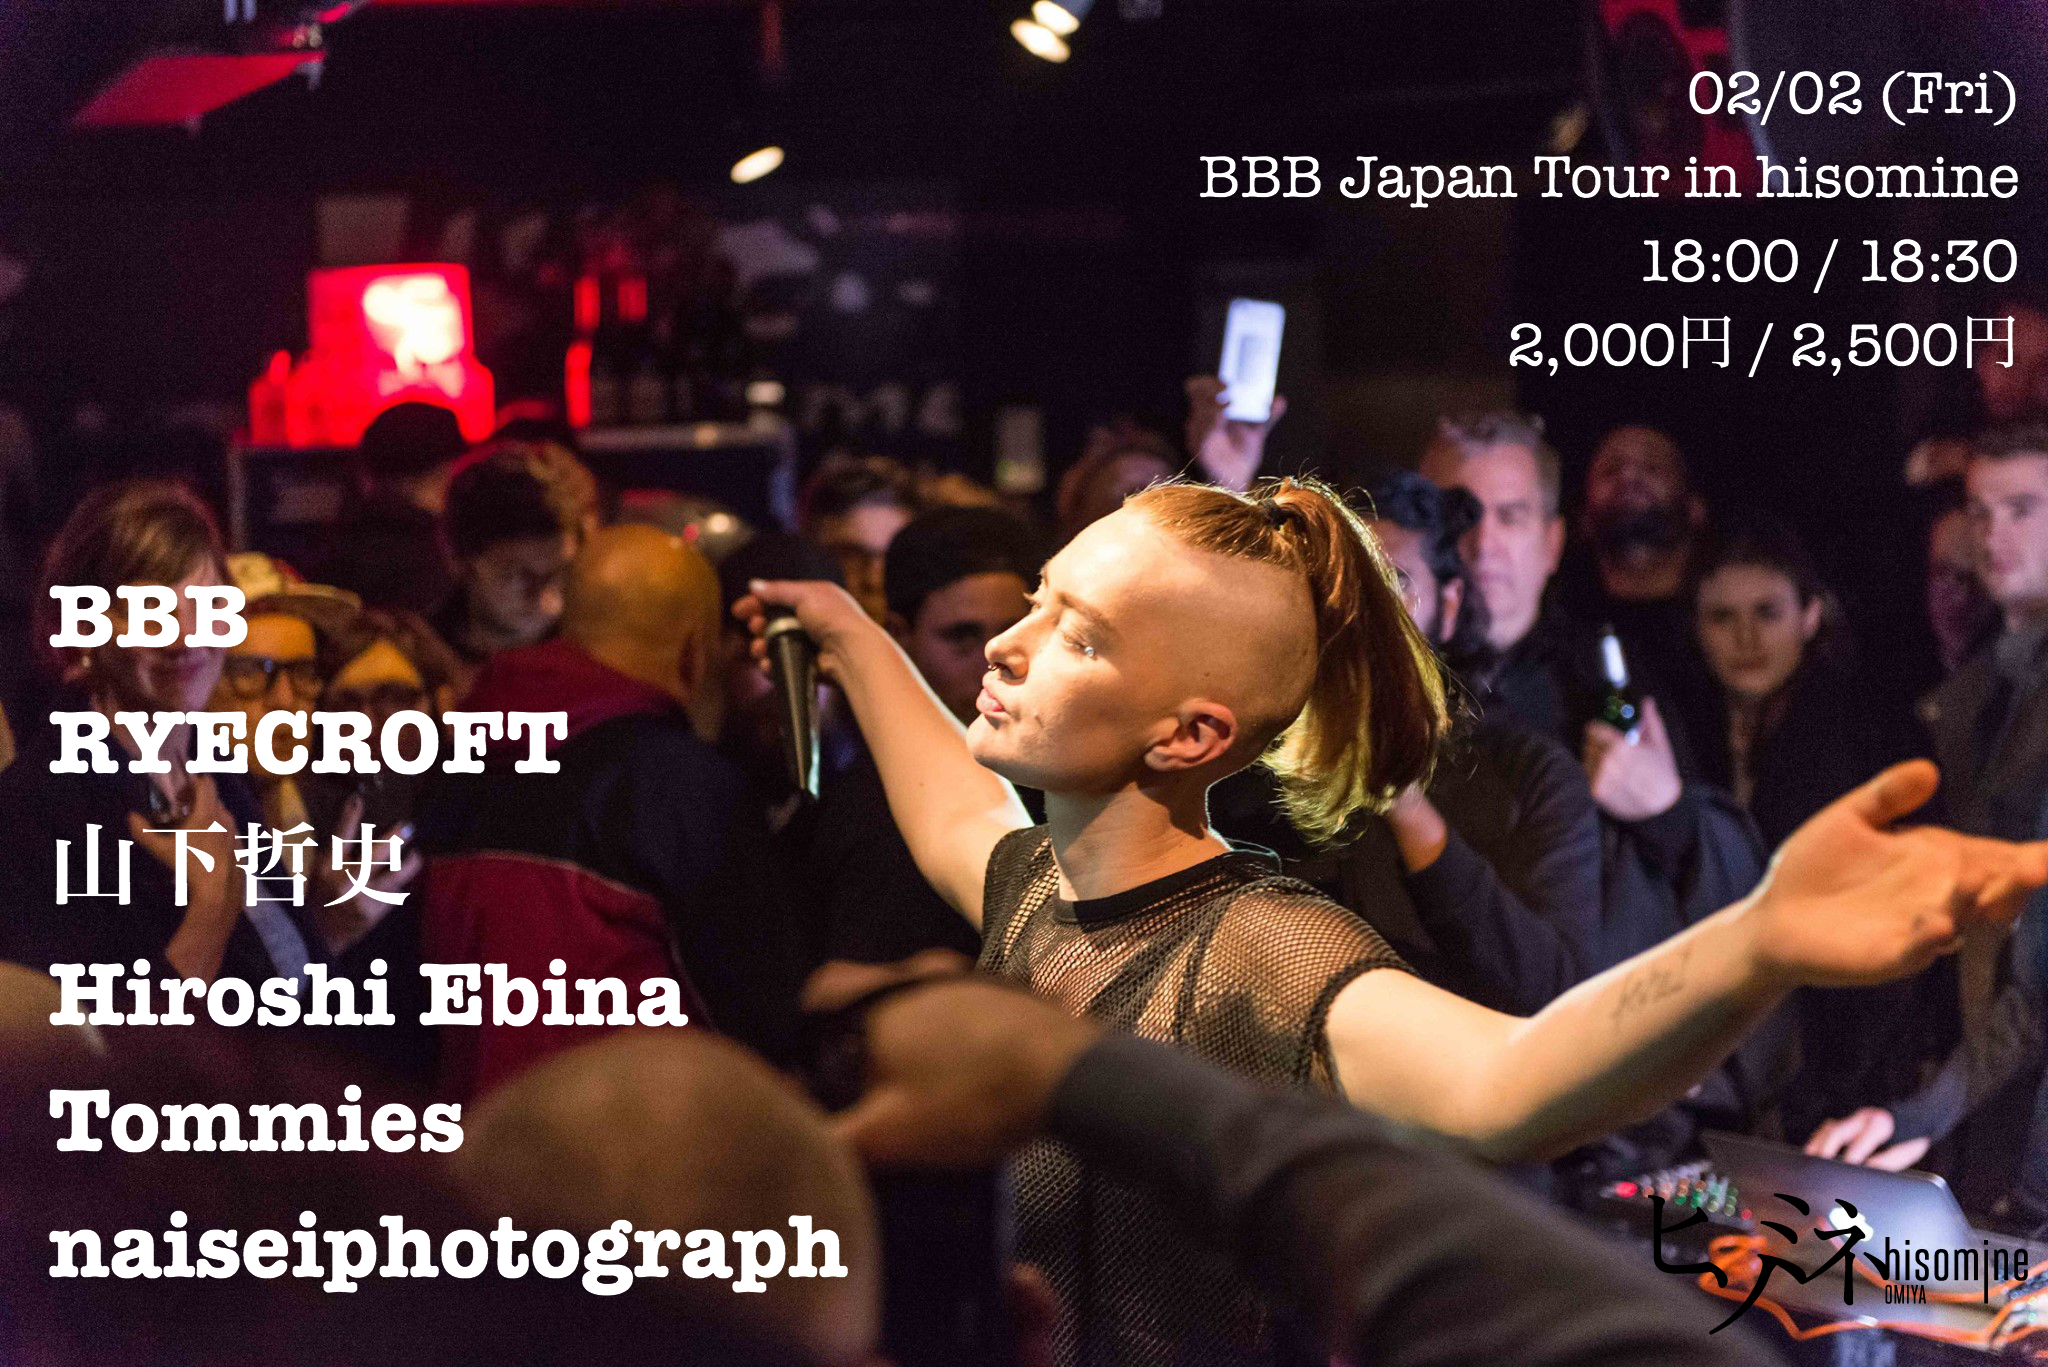 BBB Japan Tour in hisomine